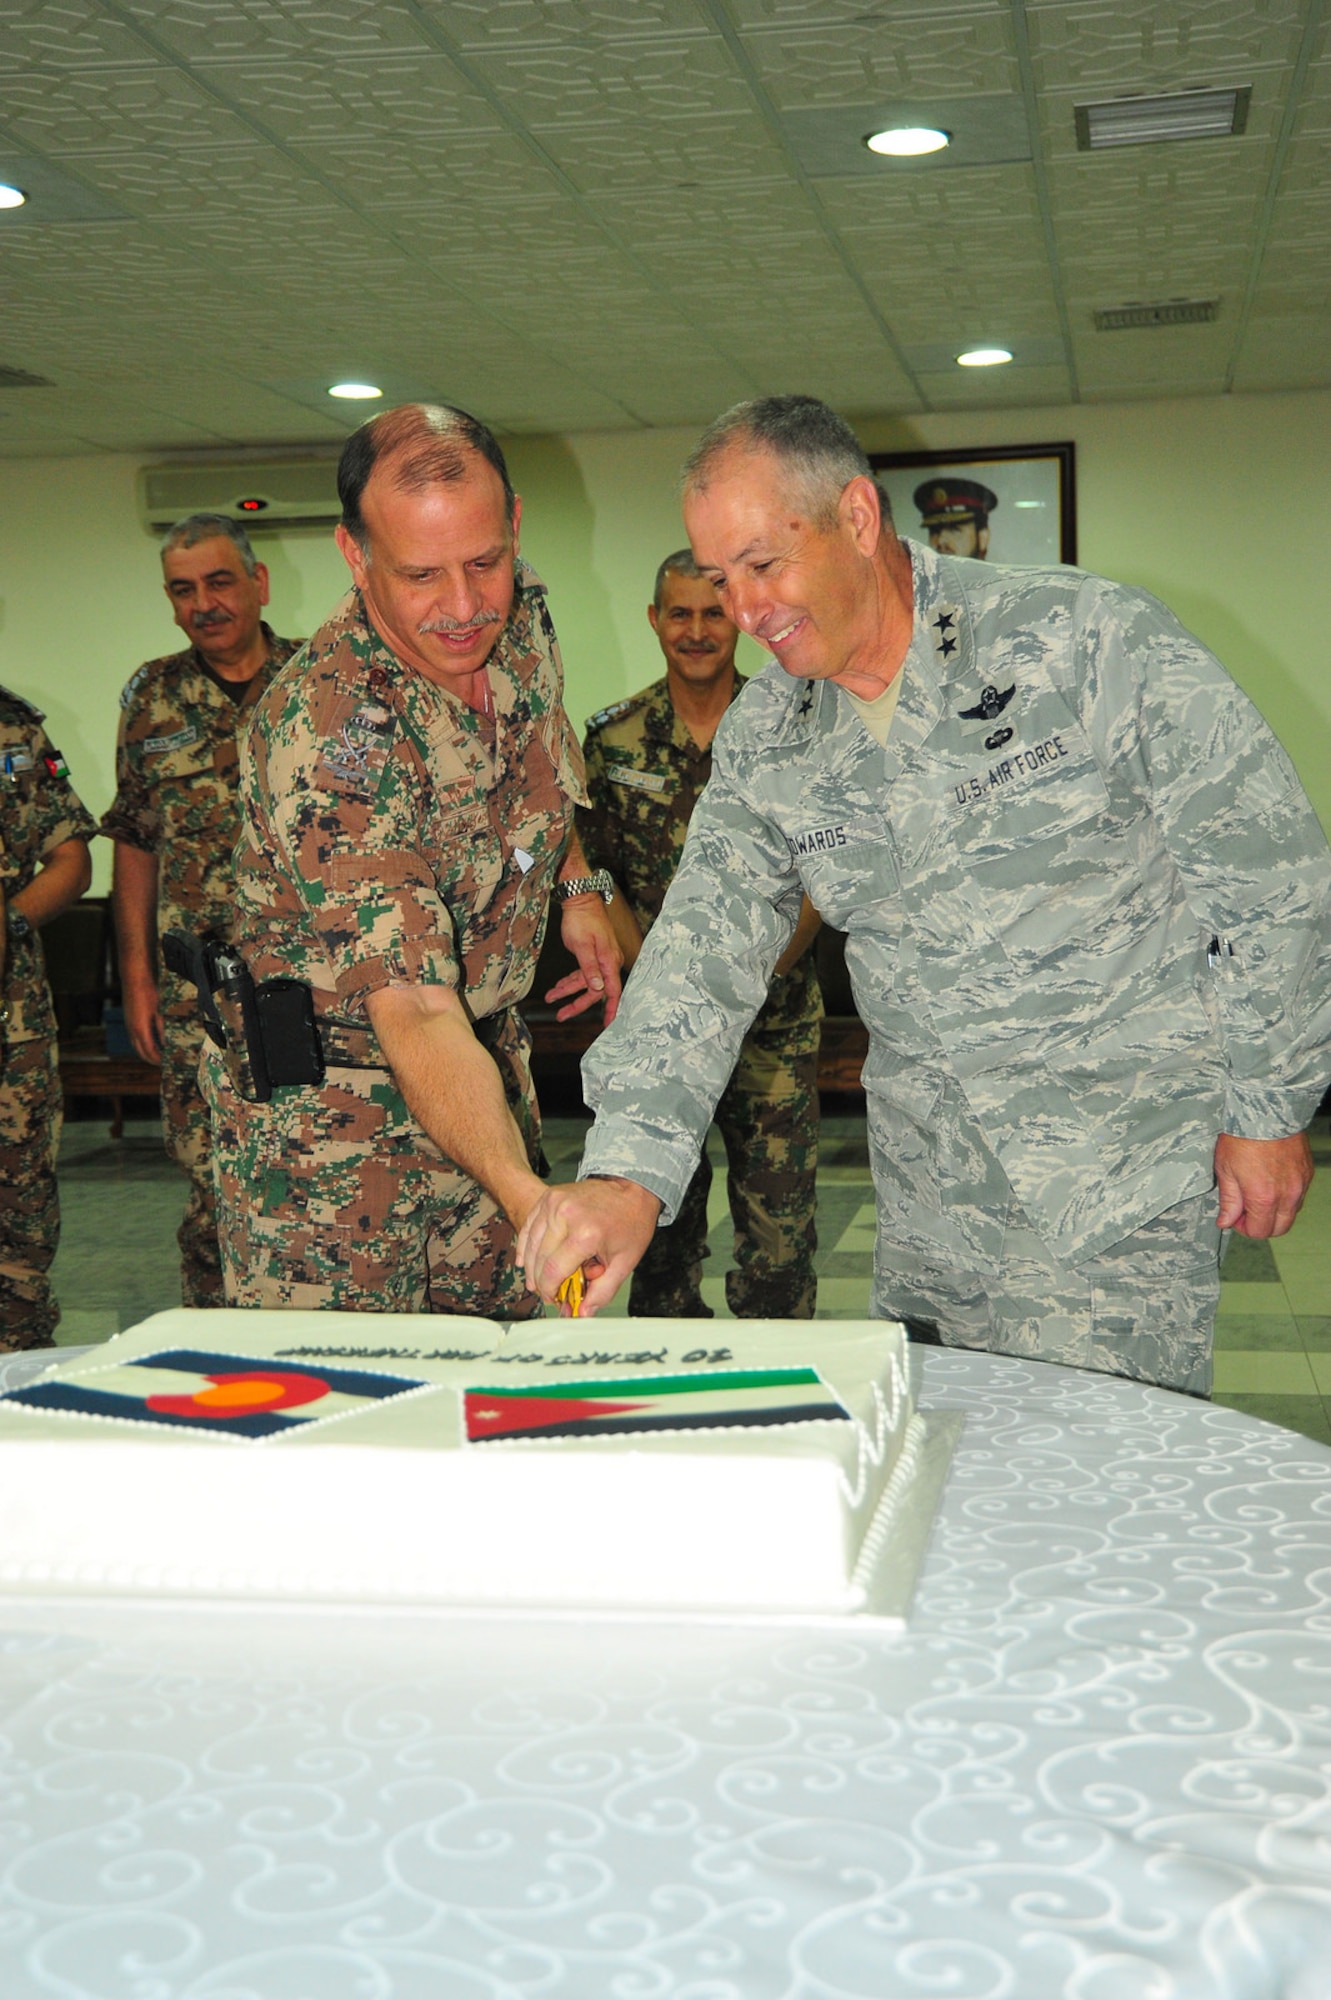 His Royal Highness Prince Feisal bin Al Hussein, of Jordan, and Maj. Gen. H. Michael Edwards, the Adjutant General of Colorado, celebrate the 10th Anniversary of the State Partnership Program relationship between the Colorado National Guard and the Hashemite Kingdom of Jordan at Mwafq Al-Salti Air Base, Jordan, May 14, 2014. (Army National Guard photo by 1st Lt. Skye Robinson)